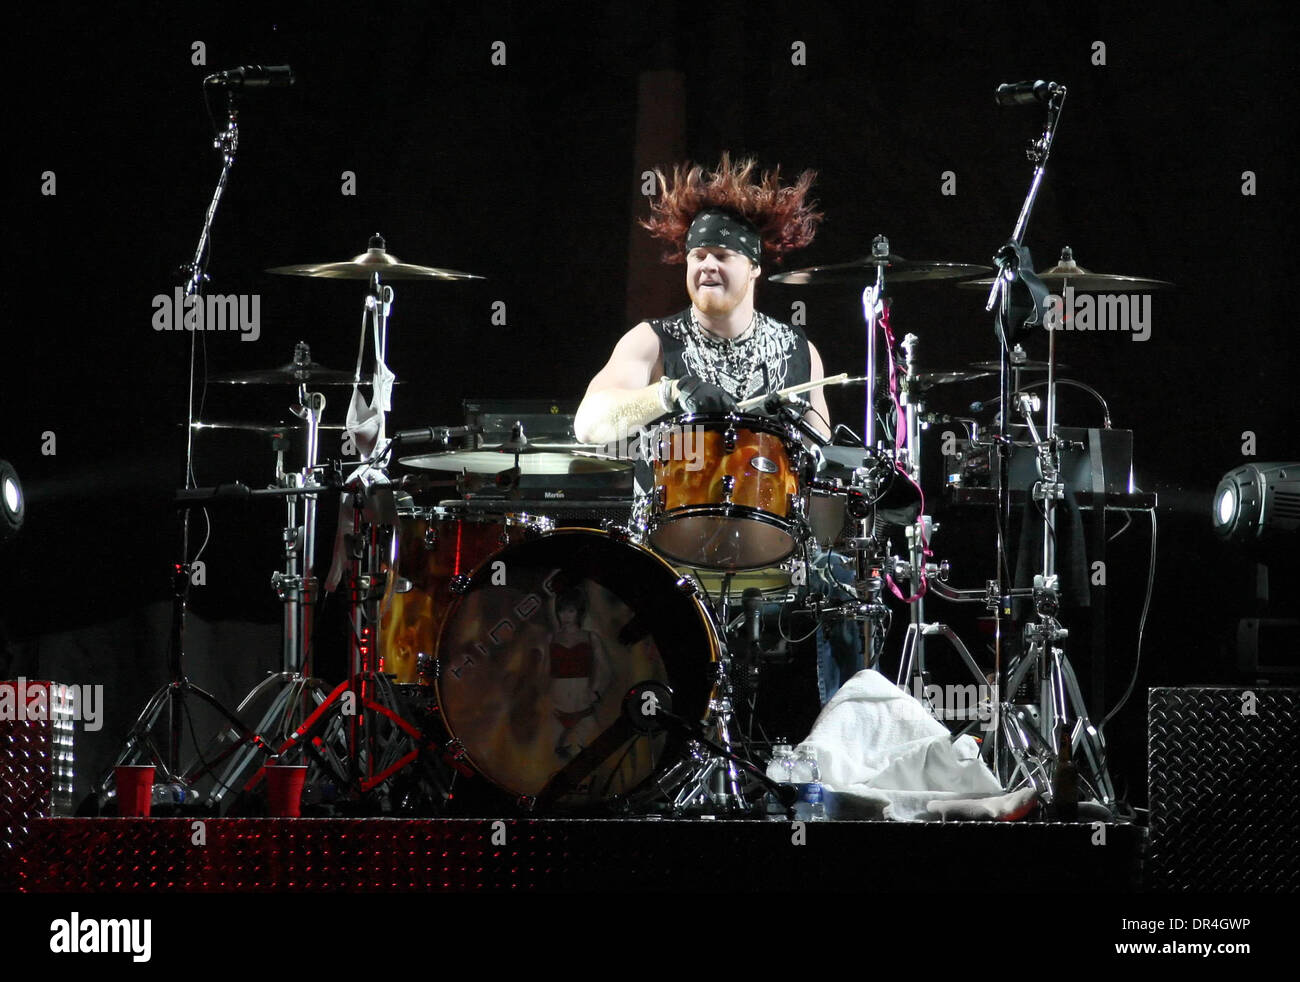 Feb 28, 2009 - New Orleans, Louisiana, USA - Drummer CODY HANSON of HINDER performs on stage during the Motley Crue Saints of Los Angeles Tour that made a stop at the New Orleans Arena in New Orleans, Louisiana. (Credit Image: © Derick Hingle/Southcreek EMI/ZUMA Press) Stock Photo